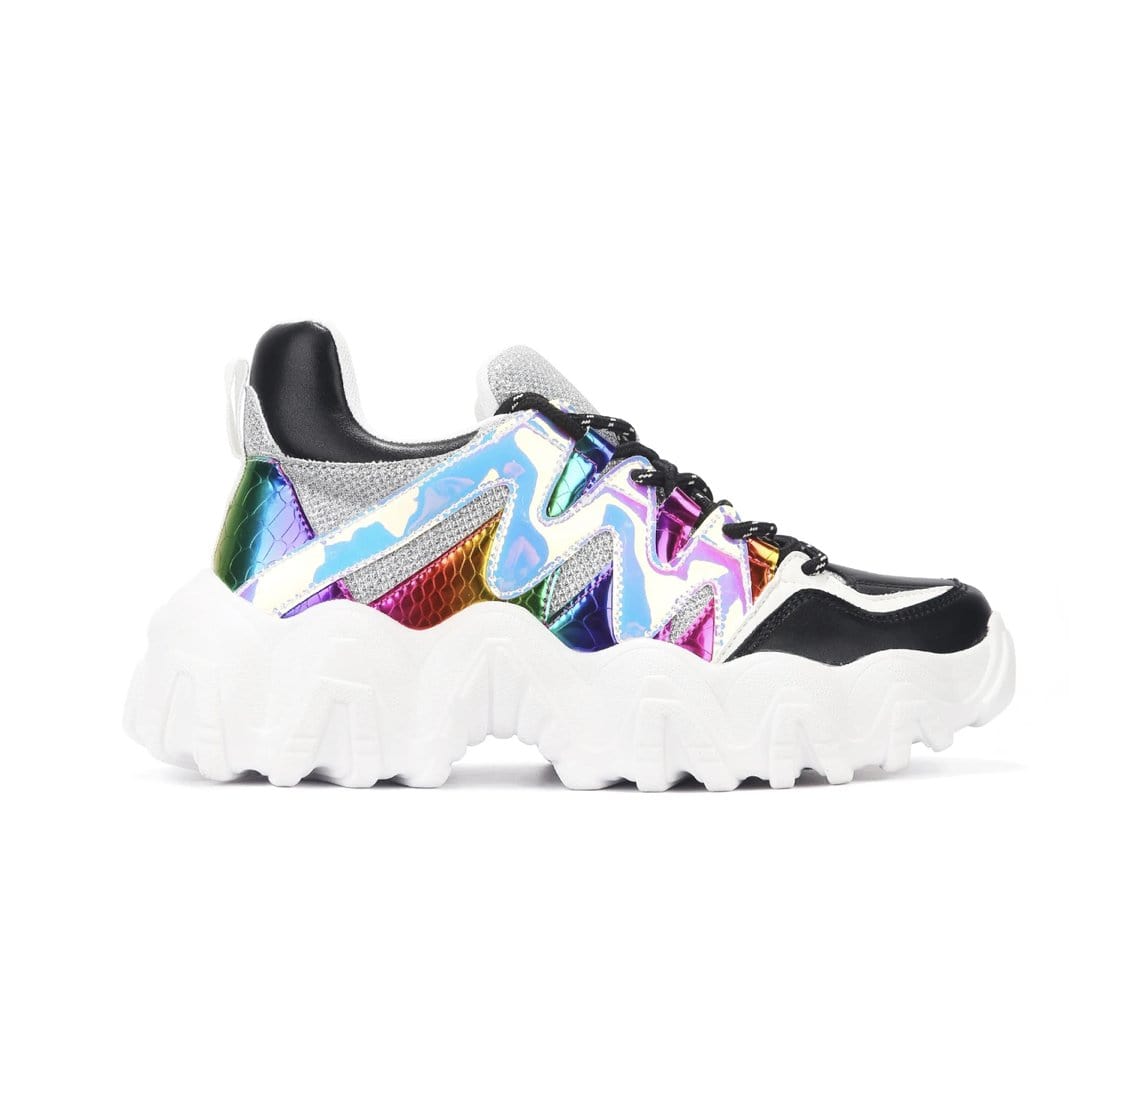 Cape Robbin Shoes Low Top Lace Up Neon Multi Color Sneakers